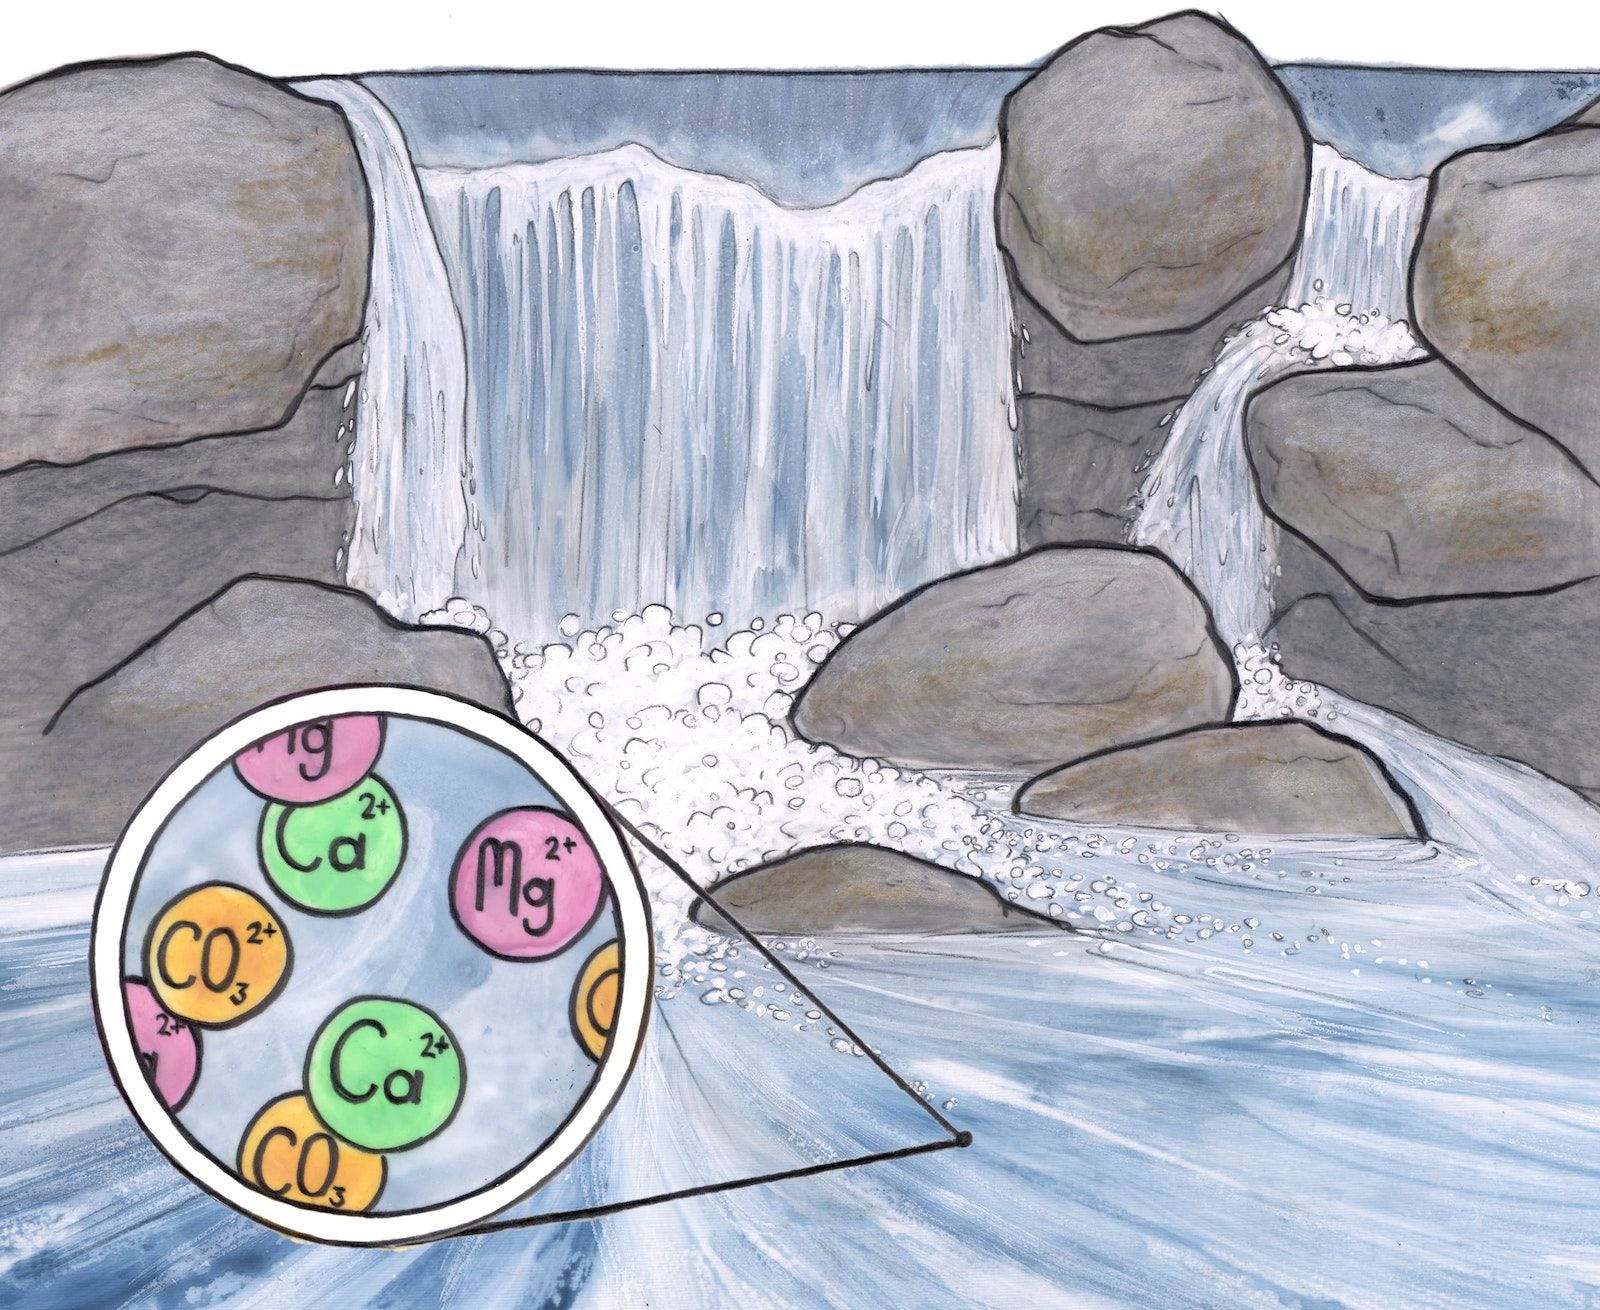 Hand drawn image of water flowing over rocks. Dissolved calcium, magnesium, and carbonate ions are illustrated as green, pink and yellow spheres in a magnified bubble.